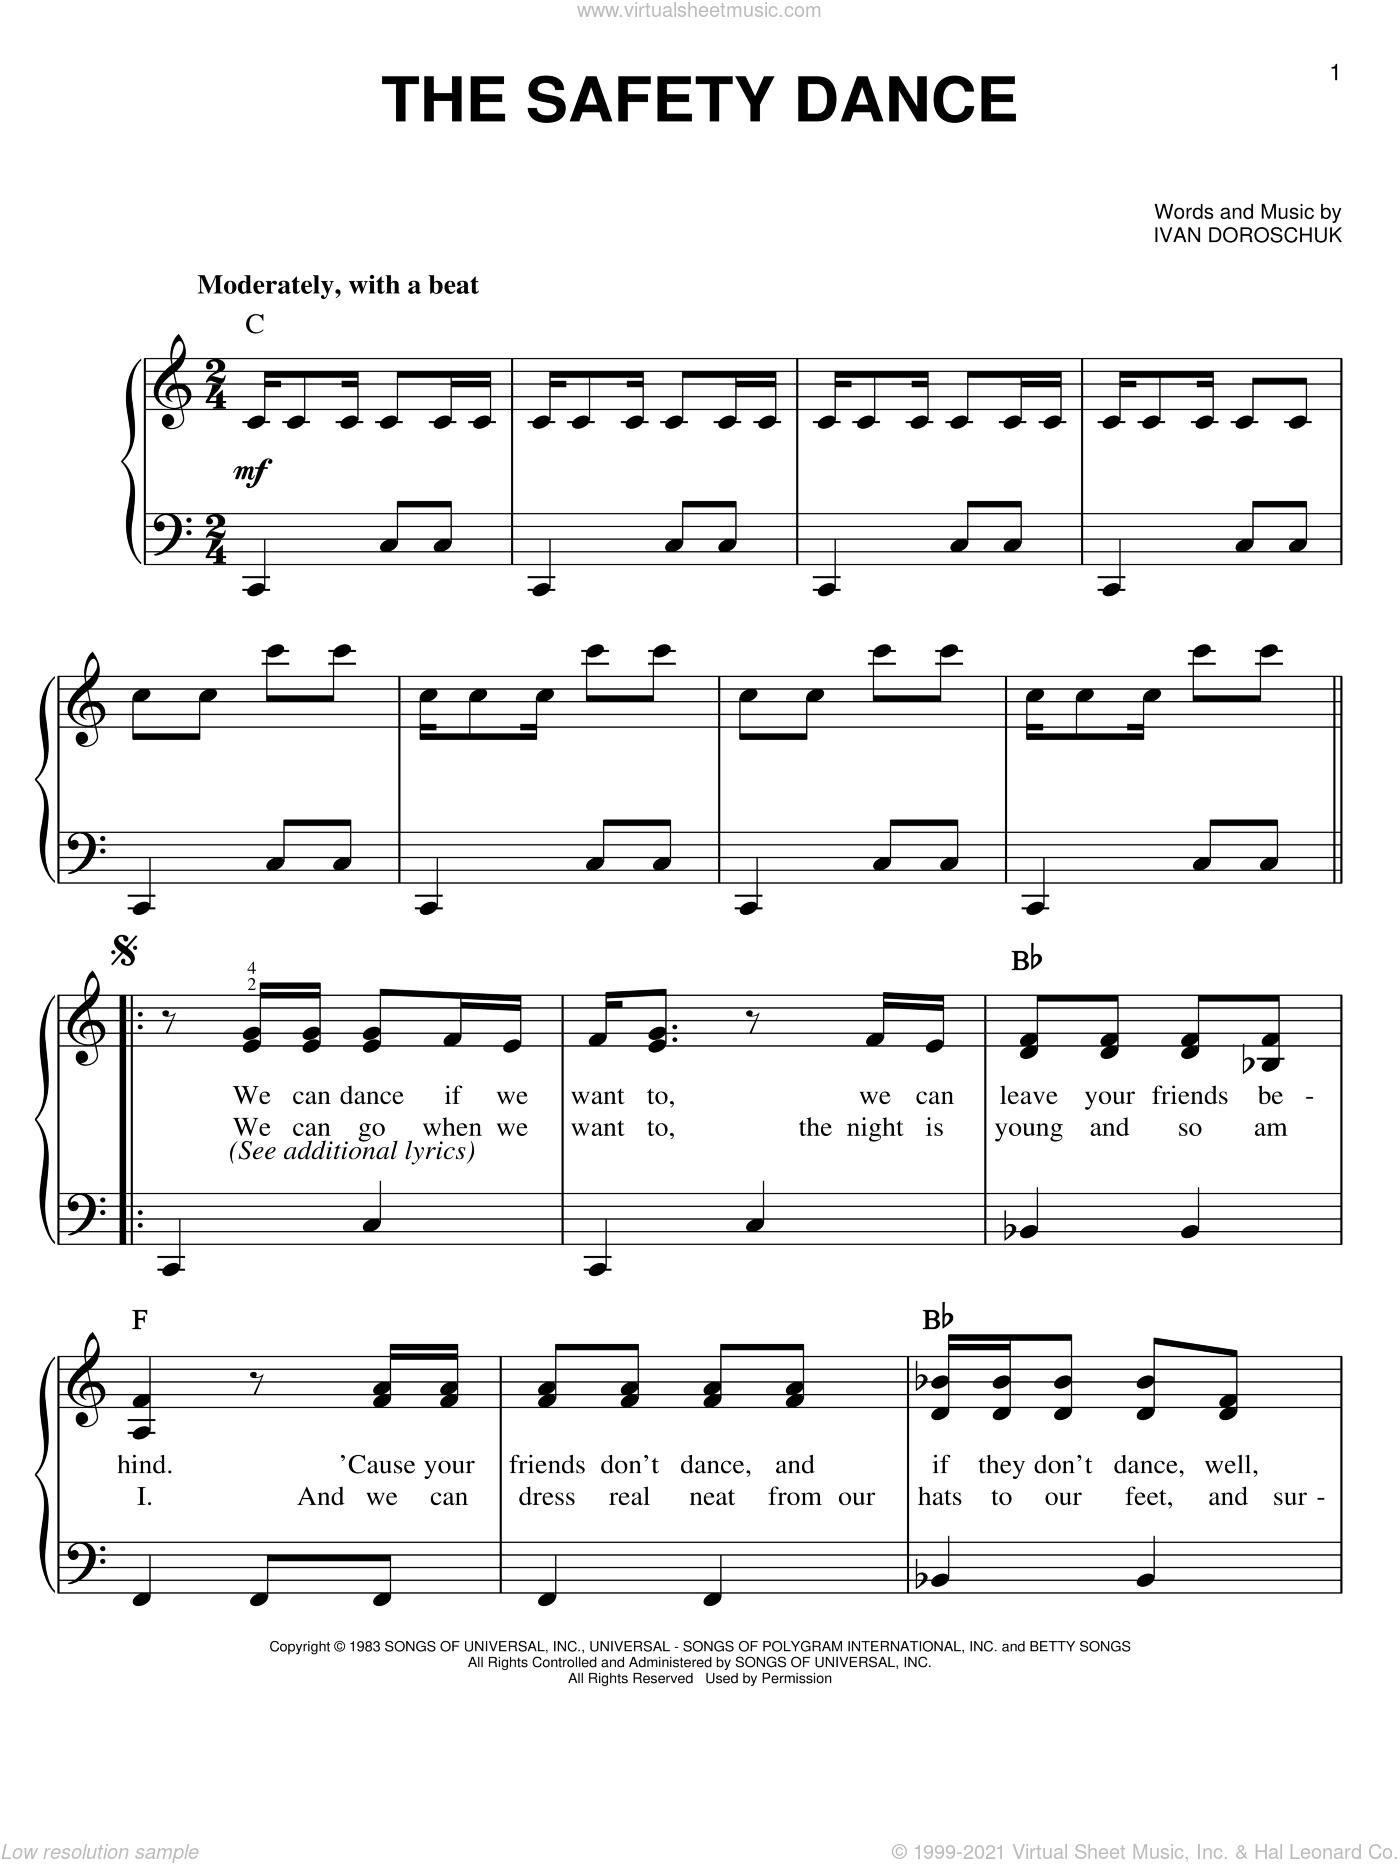 The Safety Dance for piano solo.